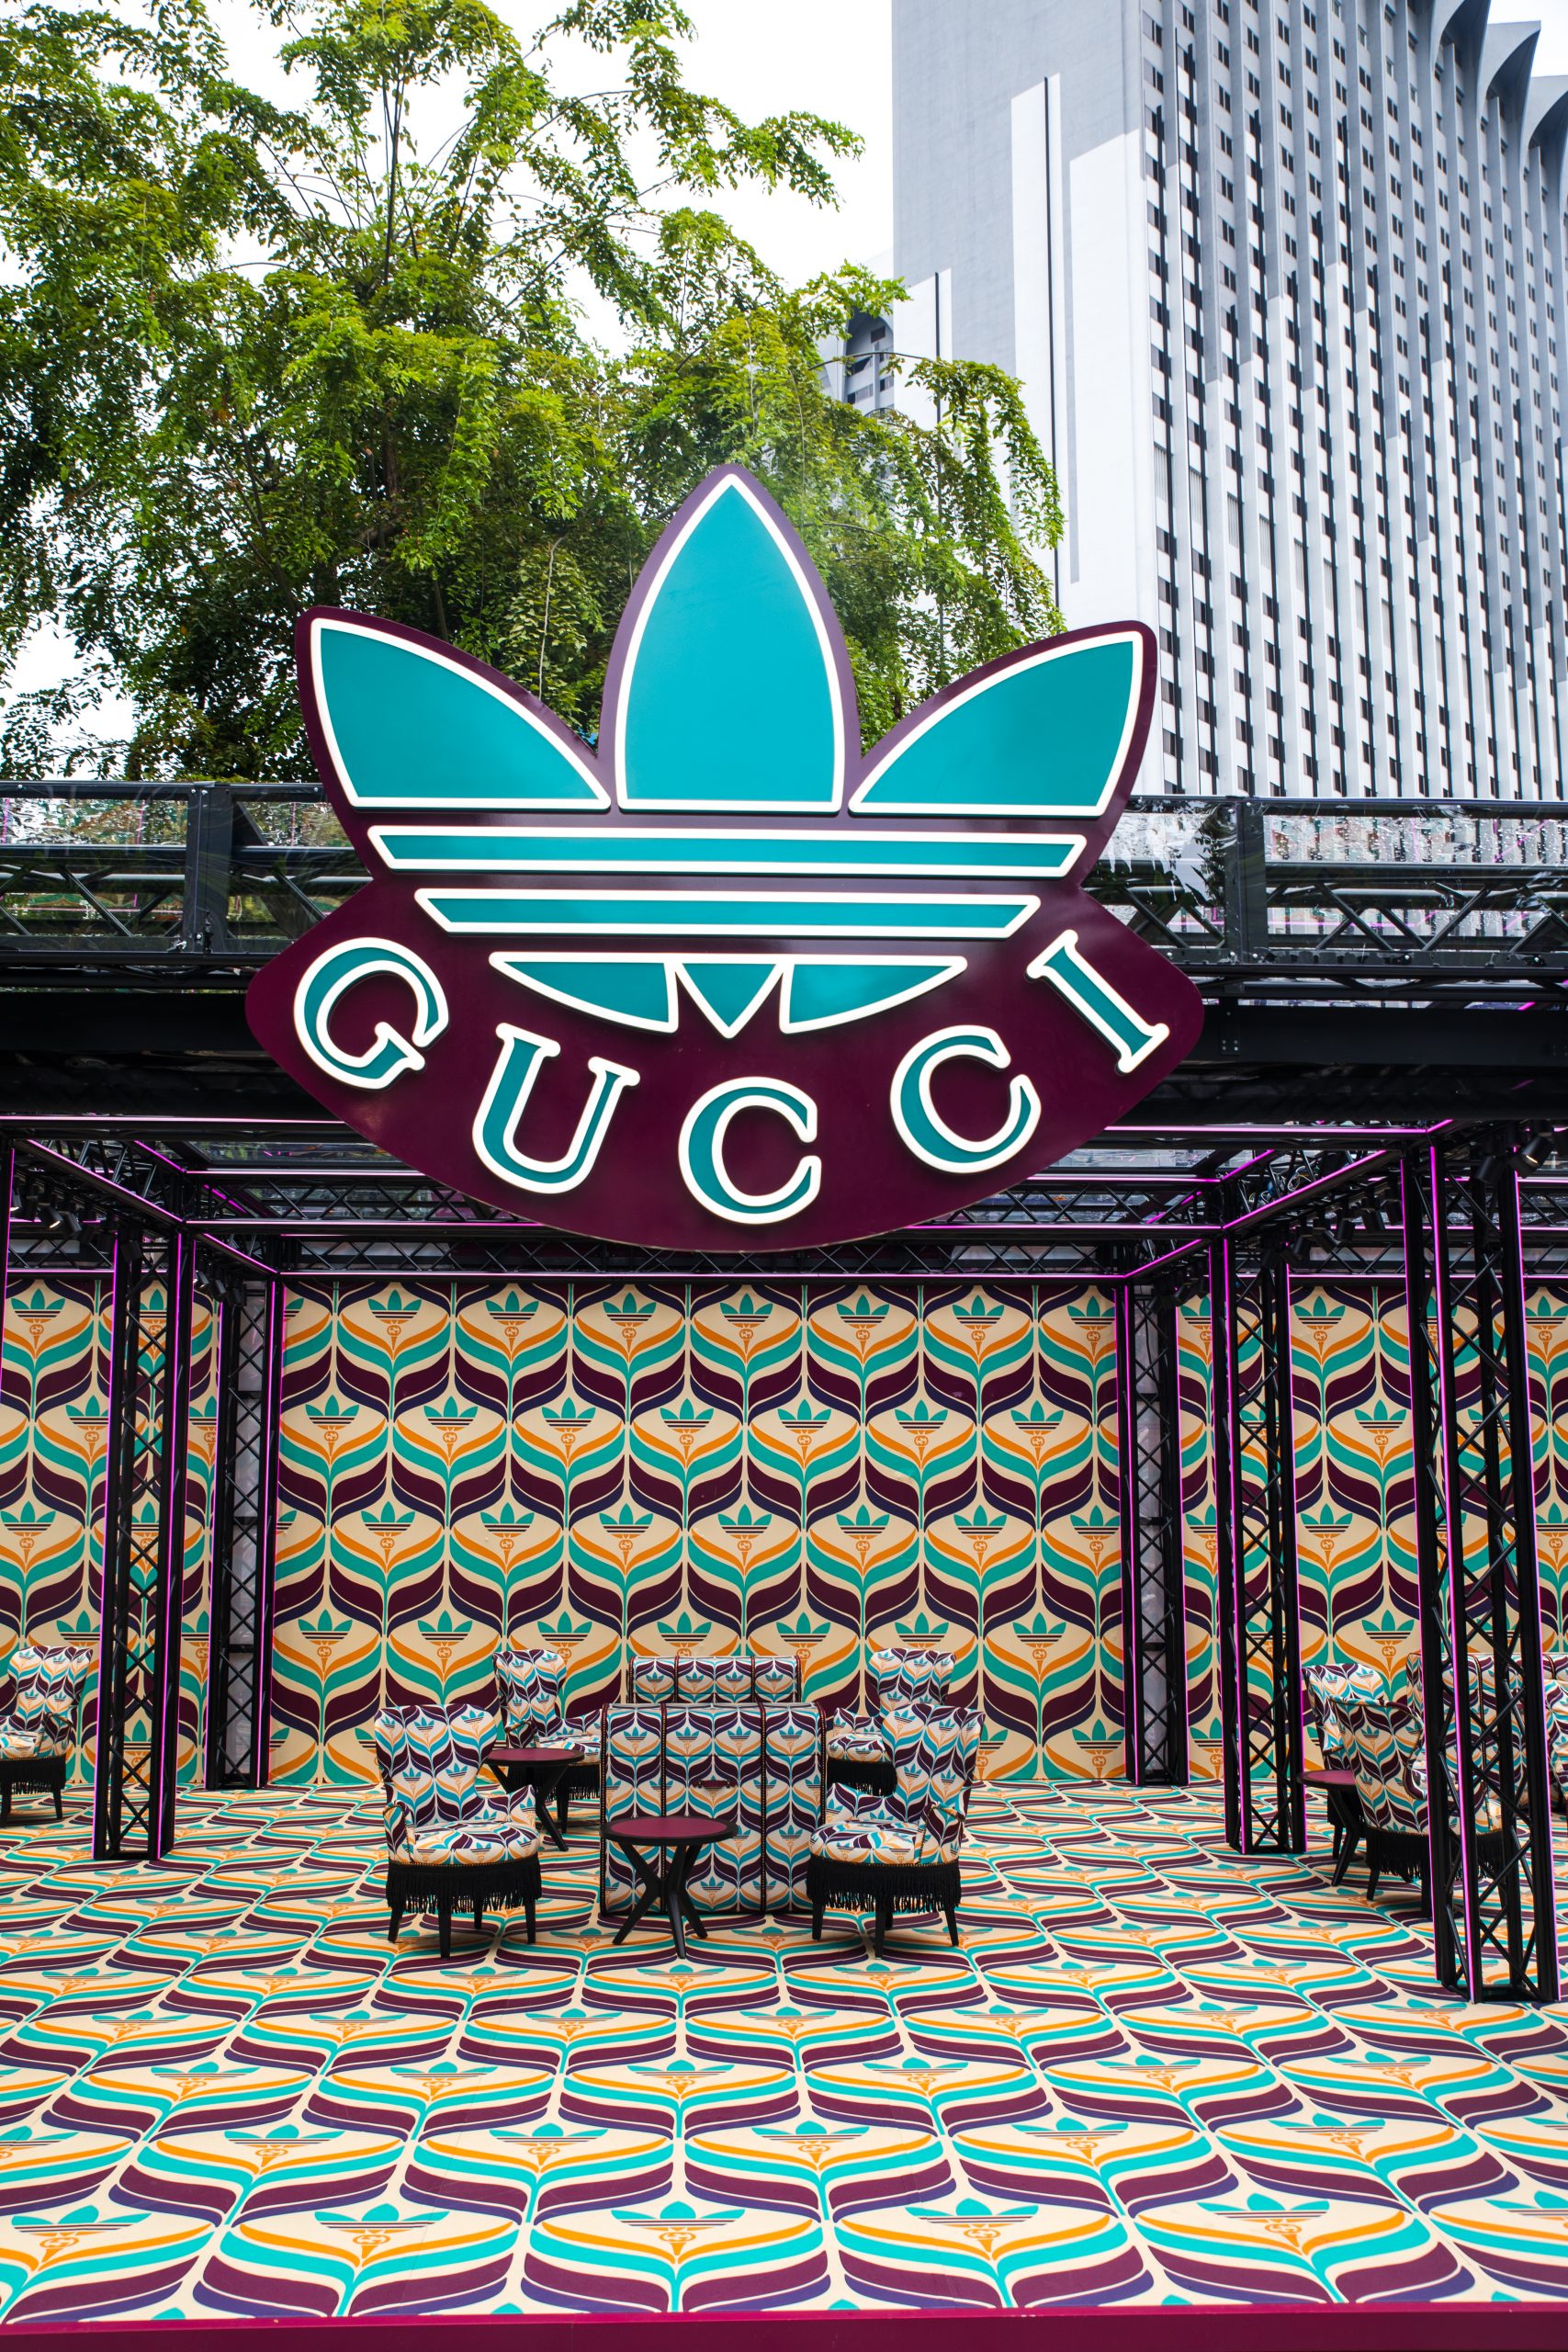 EXCLUSIVE GUCCI ADIDAS POP-UP WITH FREE ICE CREAM, MINI GOLF, GOLF BUGGY, PHOTO-OPS & MORE! –